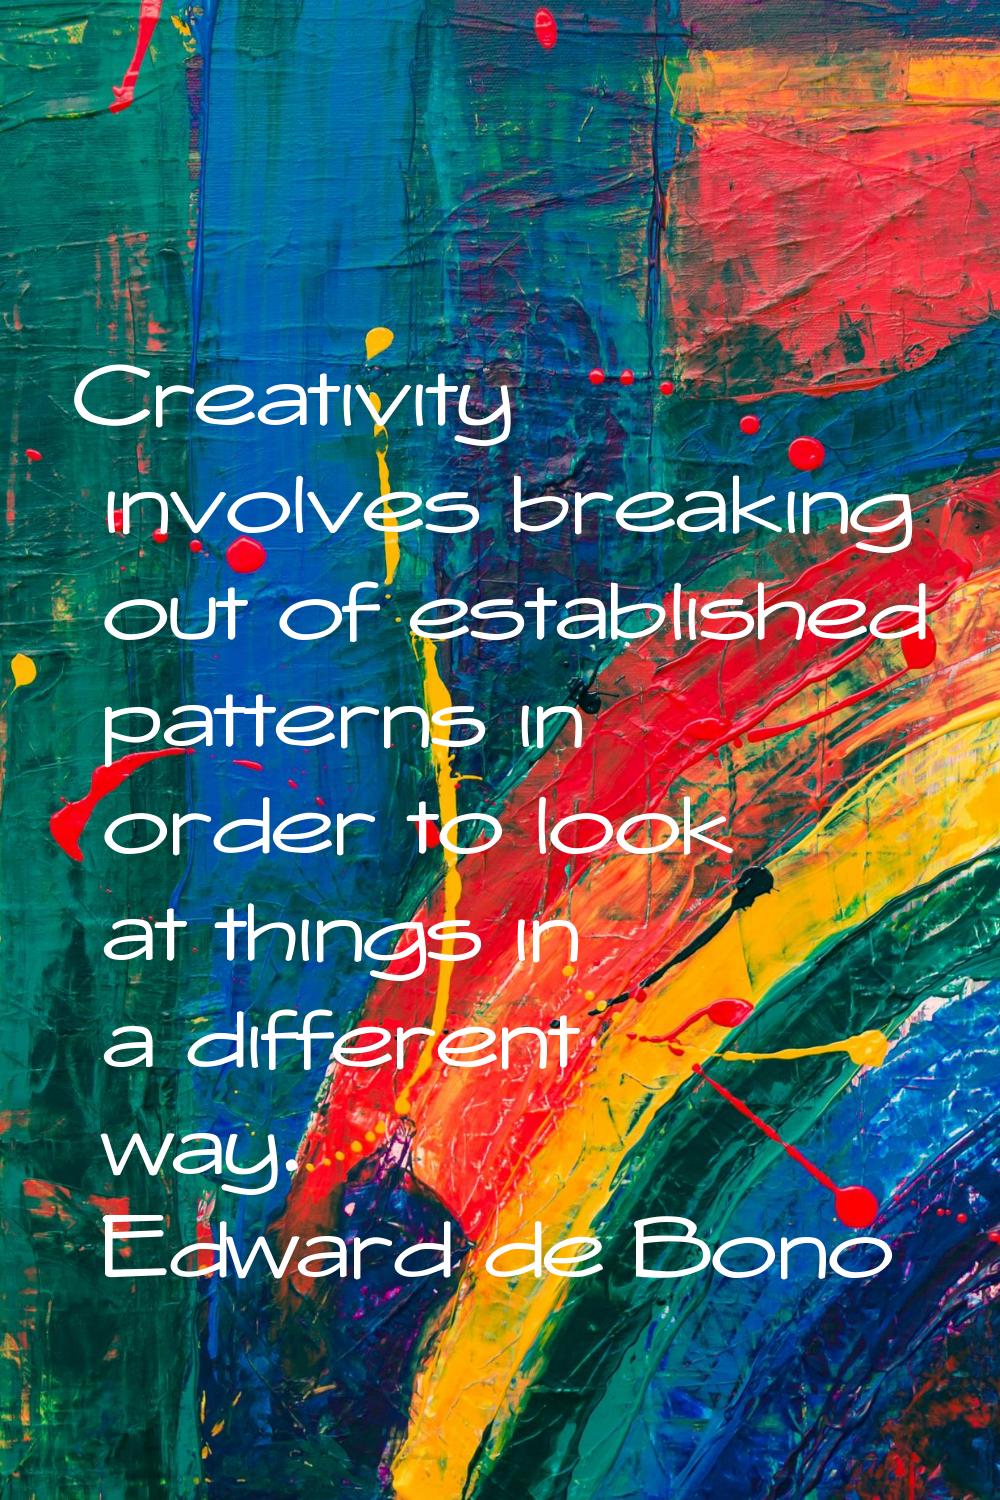 Creativity involves breaking out of established patterns in order to look at things in a different 